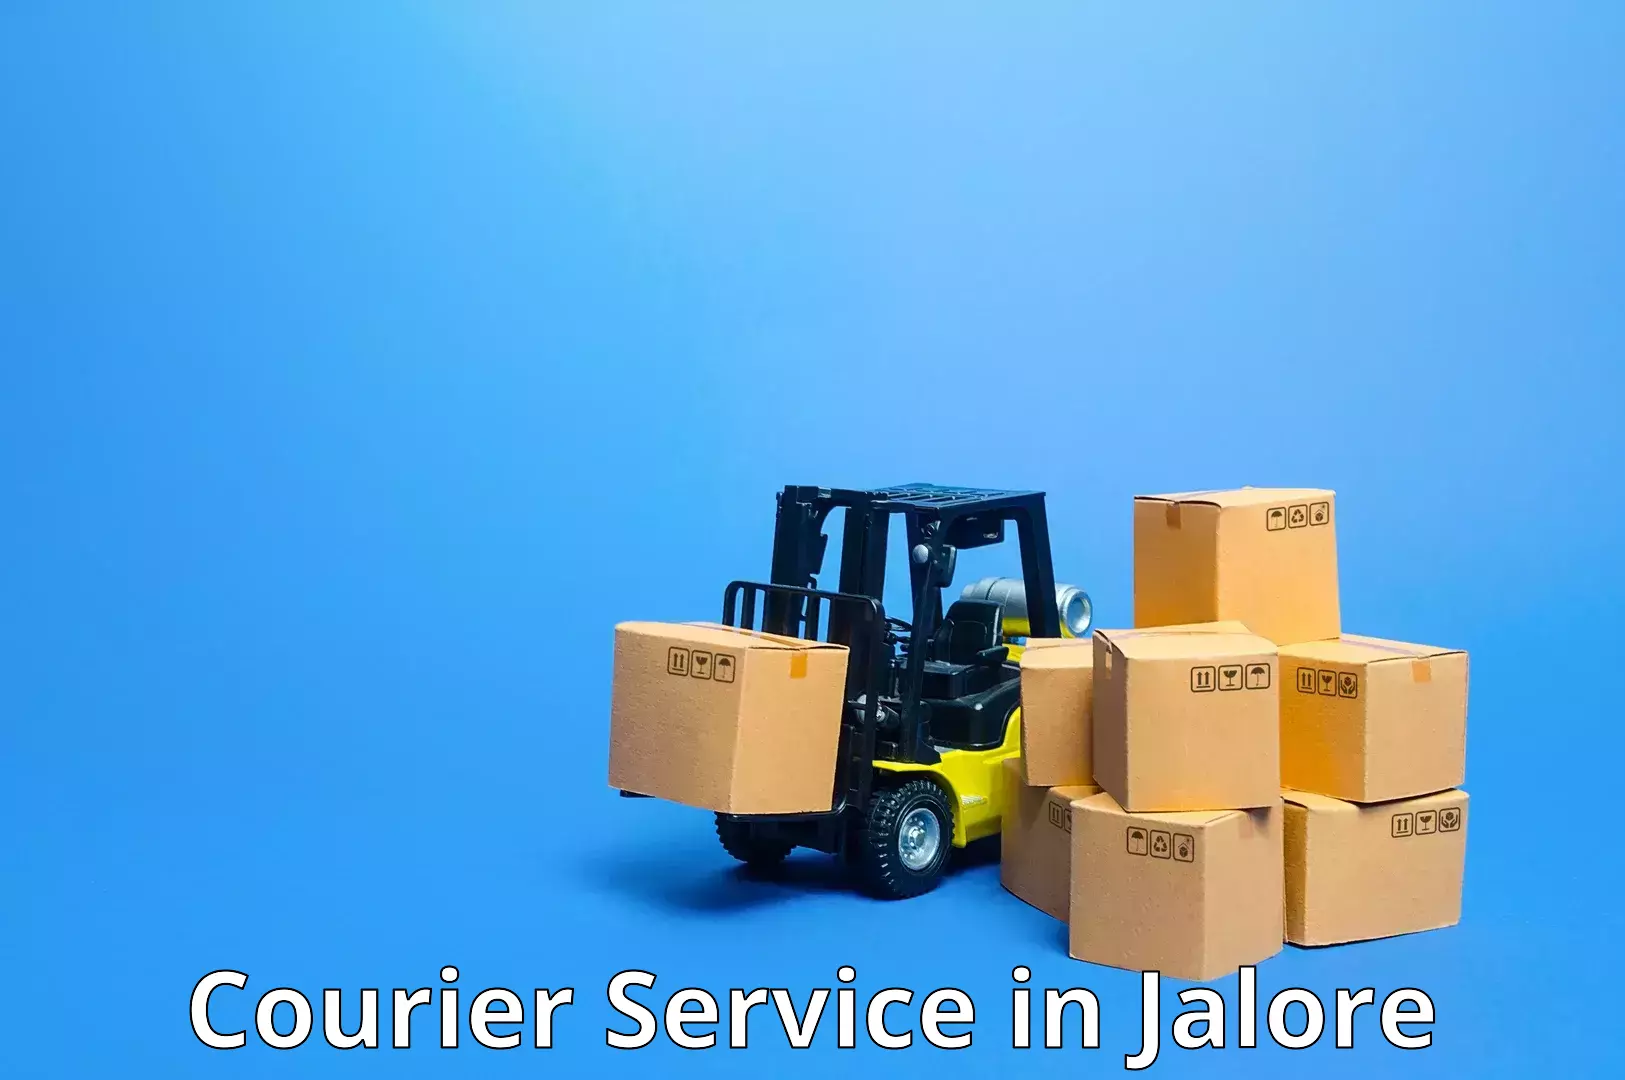 Specialized shipment handling in Jalore